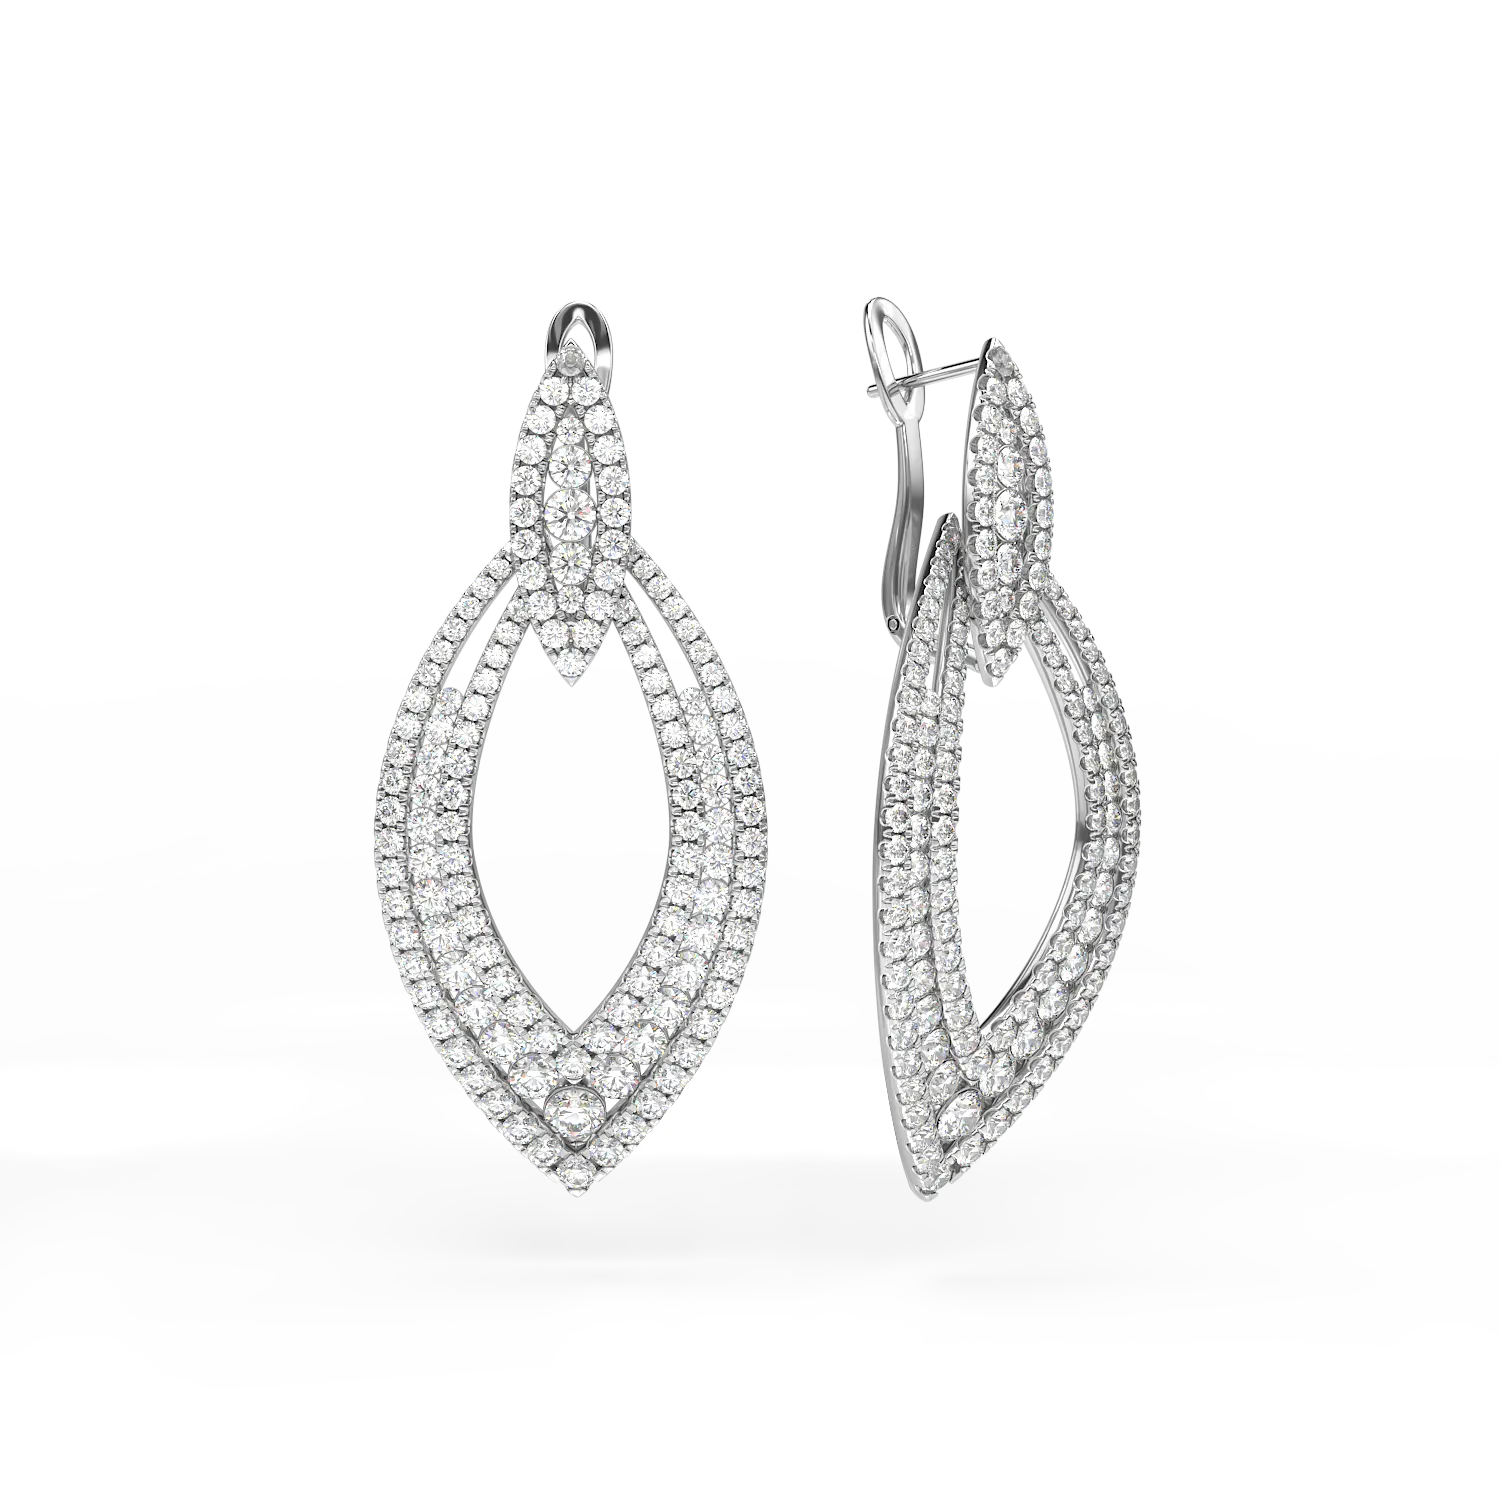 White gold earrings with 2.6ct diamonds